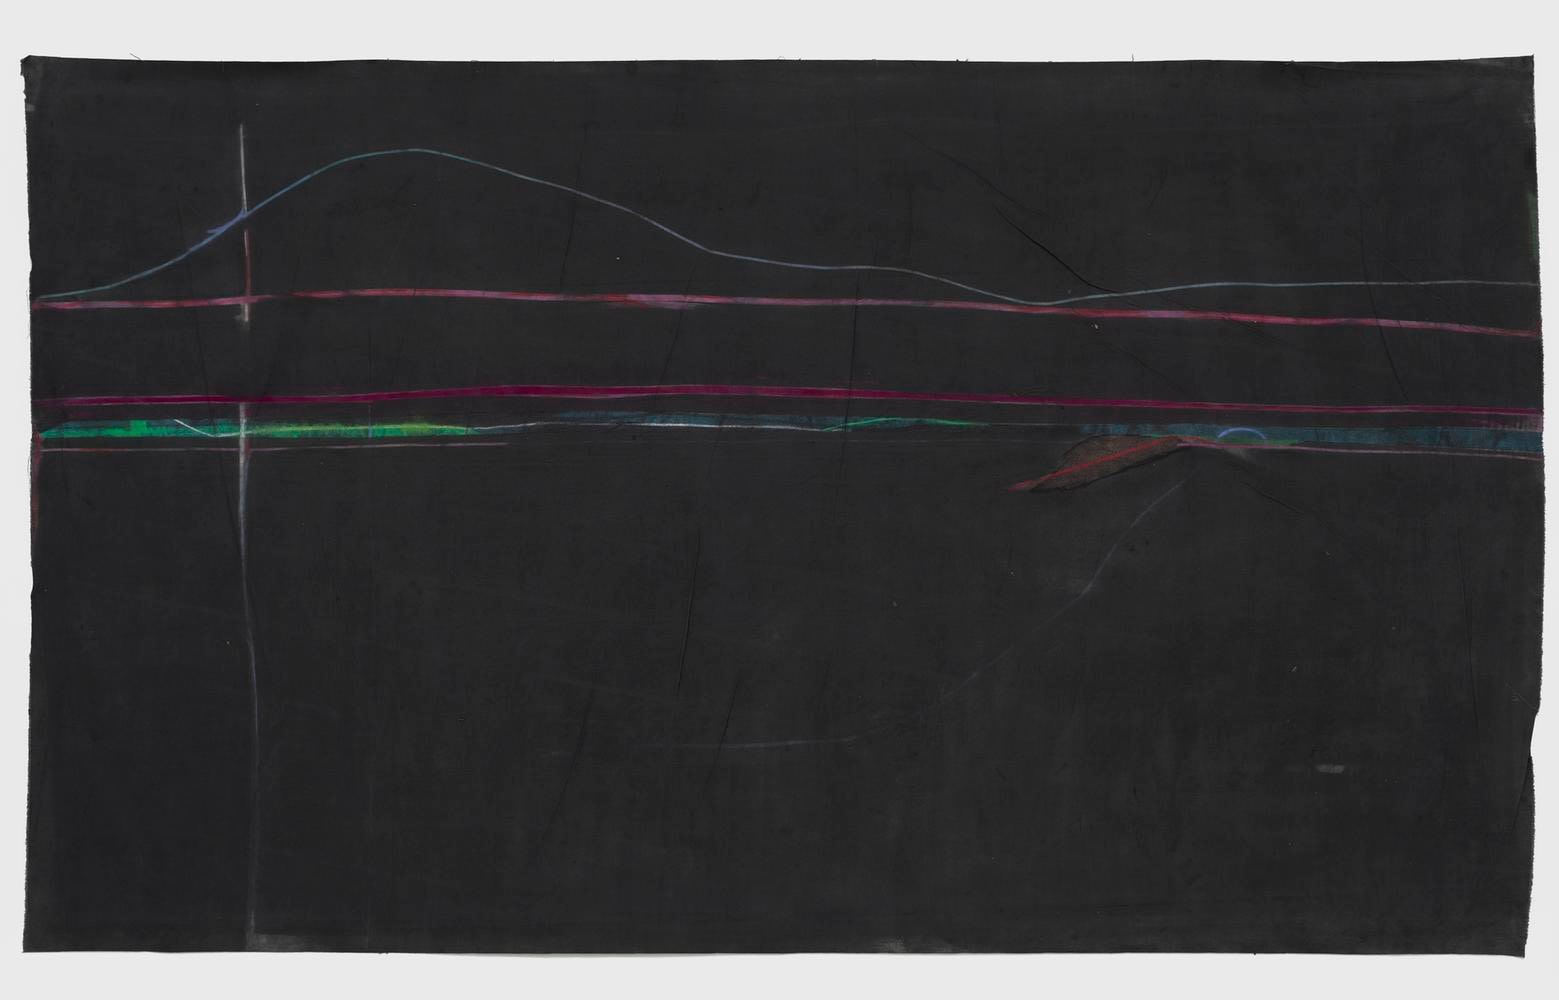 Mary Lovelace O&amp;#39;Neal

The Four Cardinal Points Are Three: North and South

circa&amp;nbsp;1970s

lampblack pigment, masking tape, and pastel on unstretched canvas

85 1/4 x 144 1/2 inches (216.5 x 367 cm)&amp;nbsp;